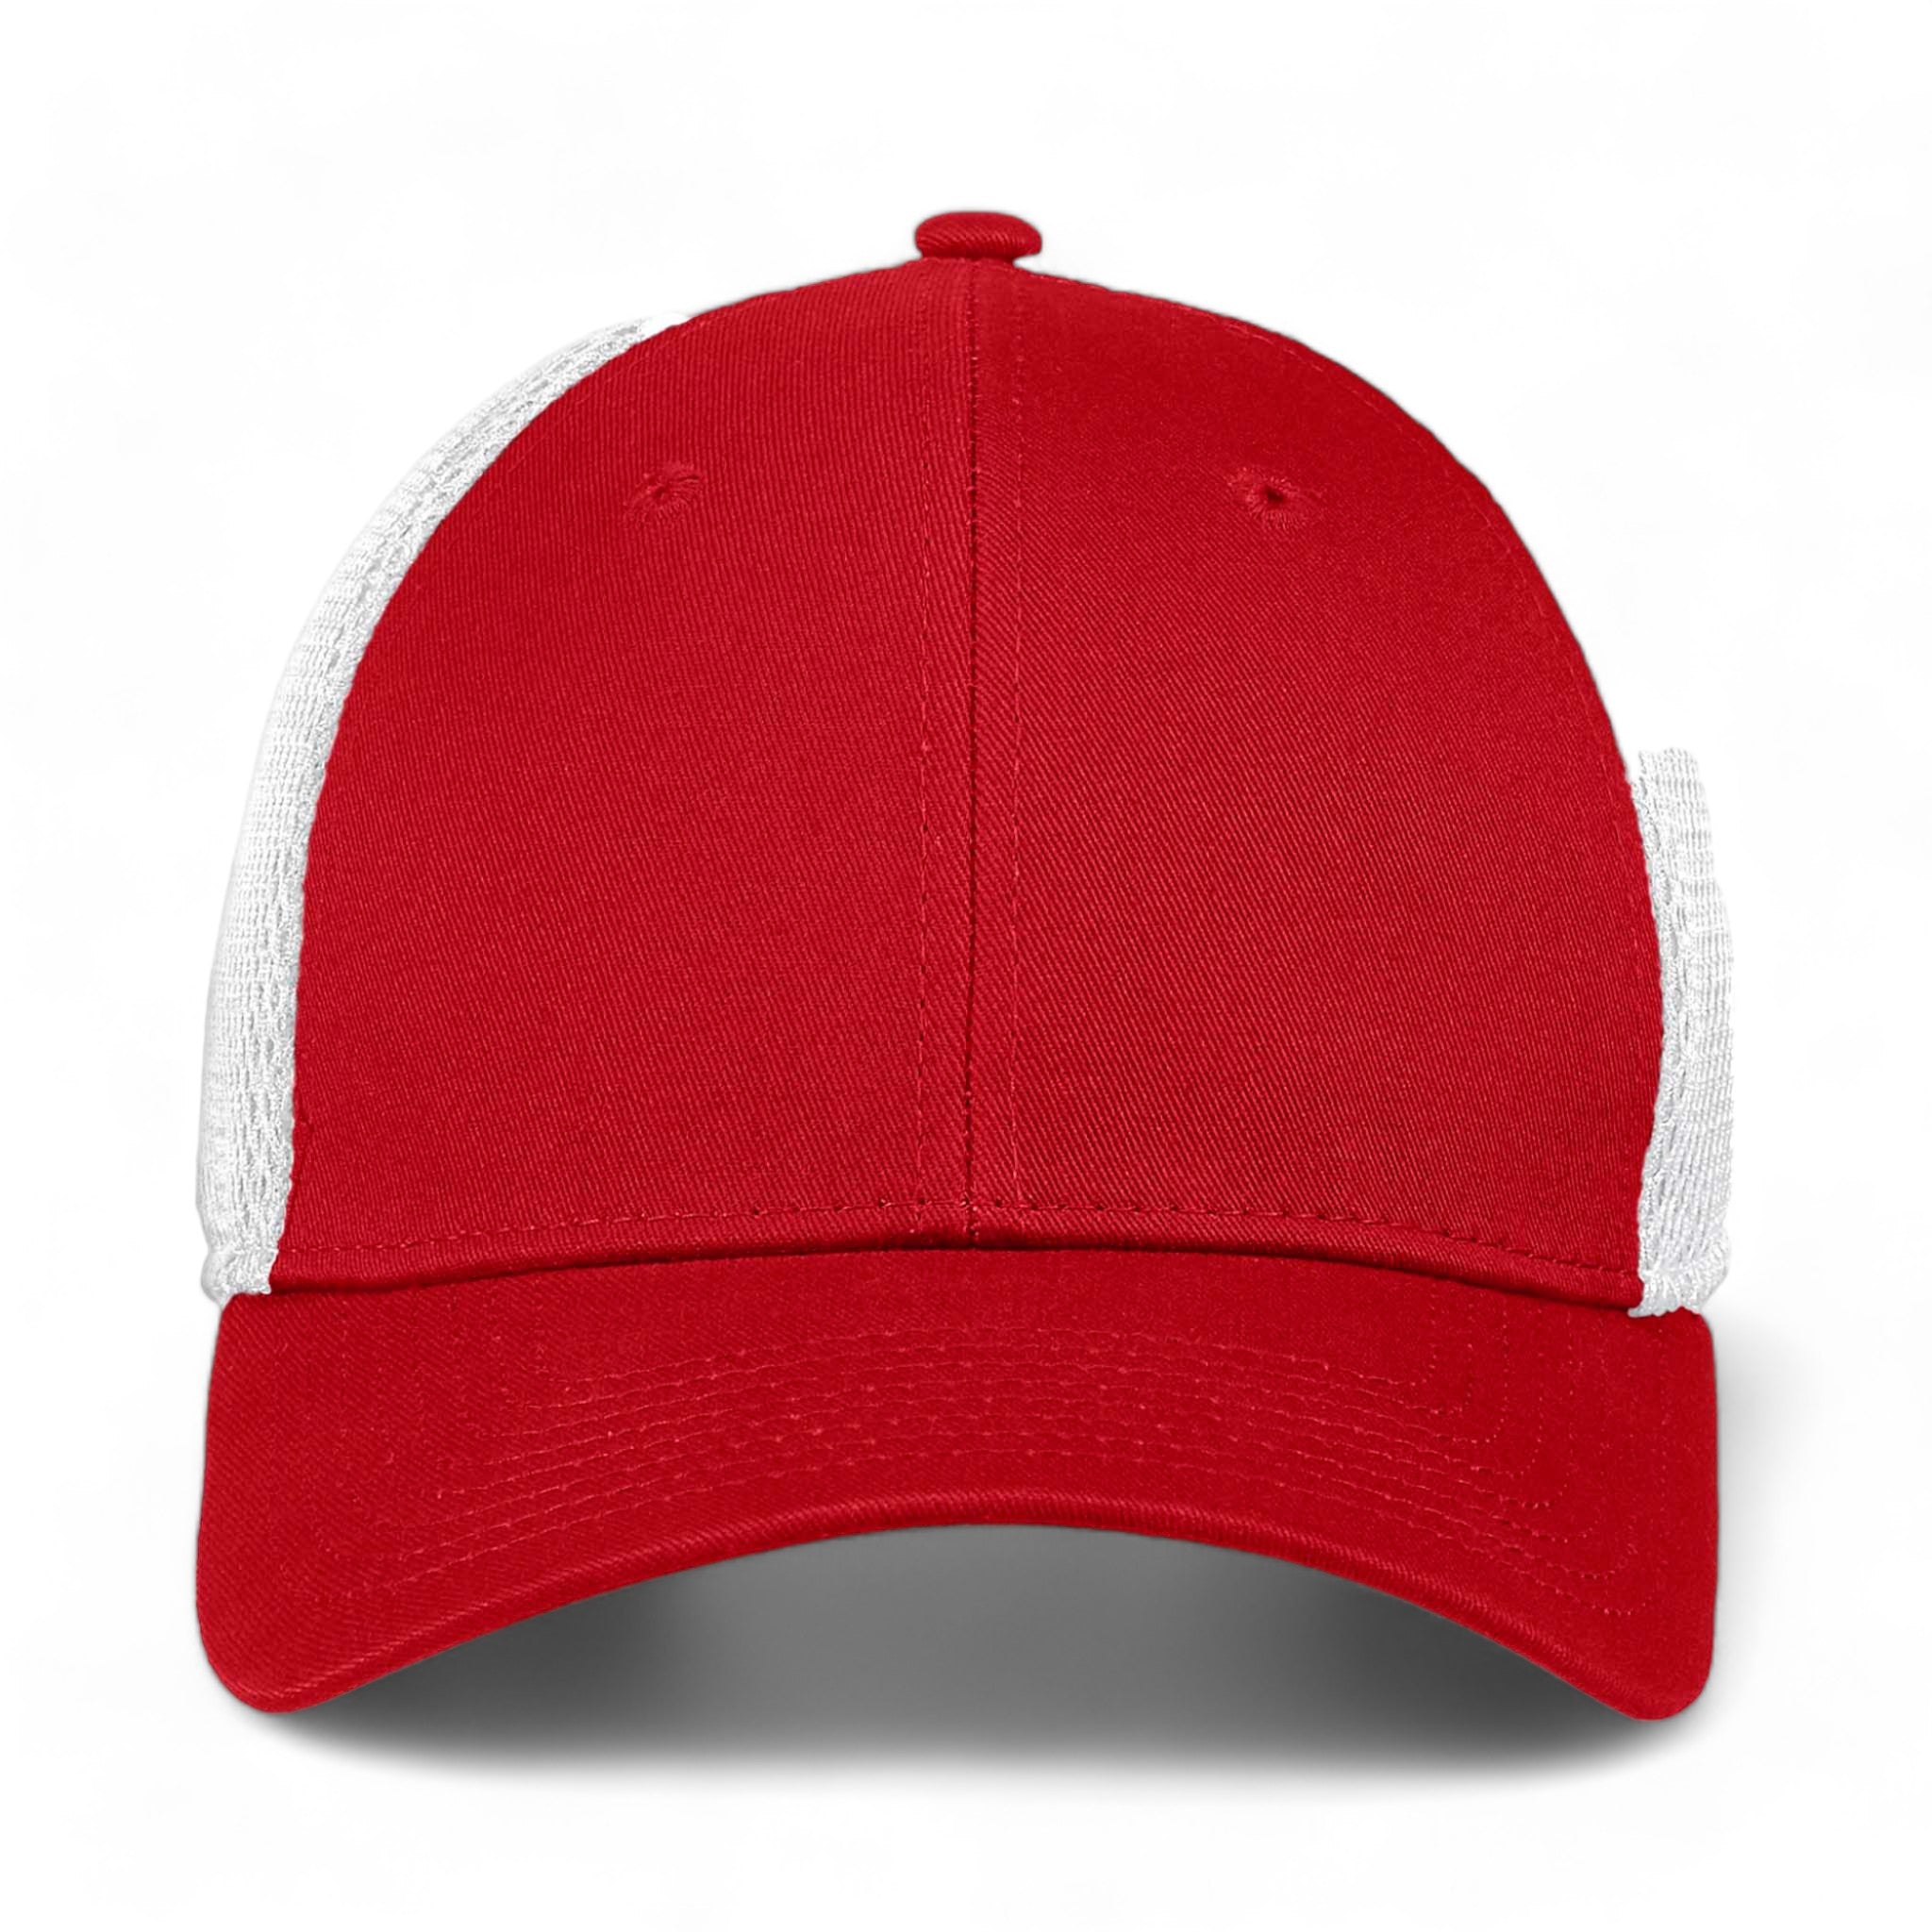 Front view of New Era NE1020 custom hat in scarlet red and white